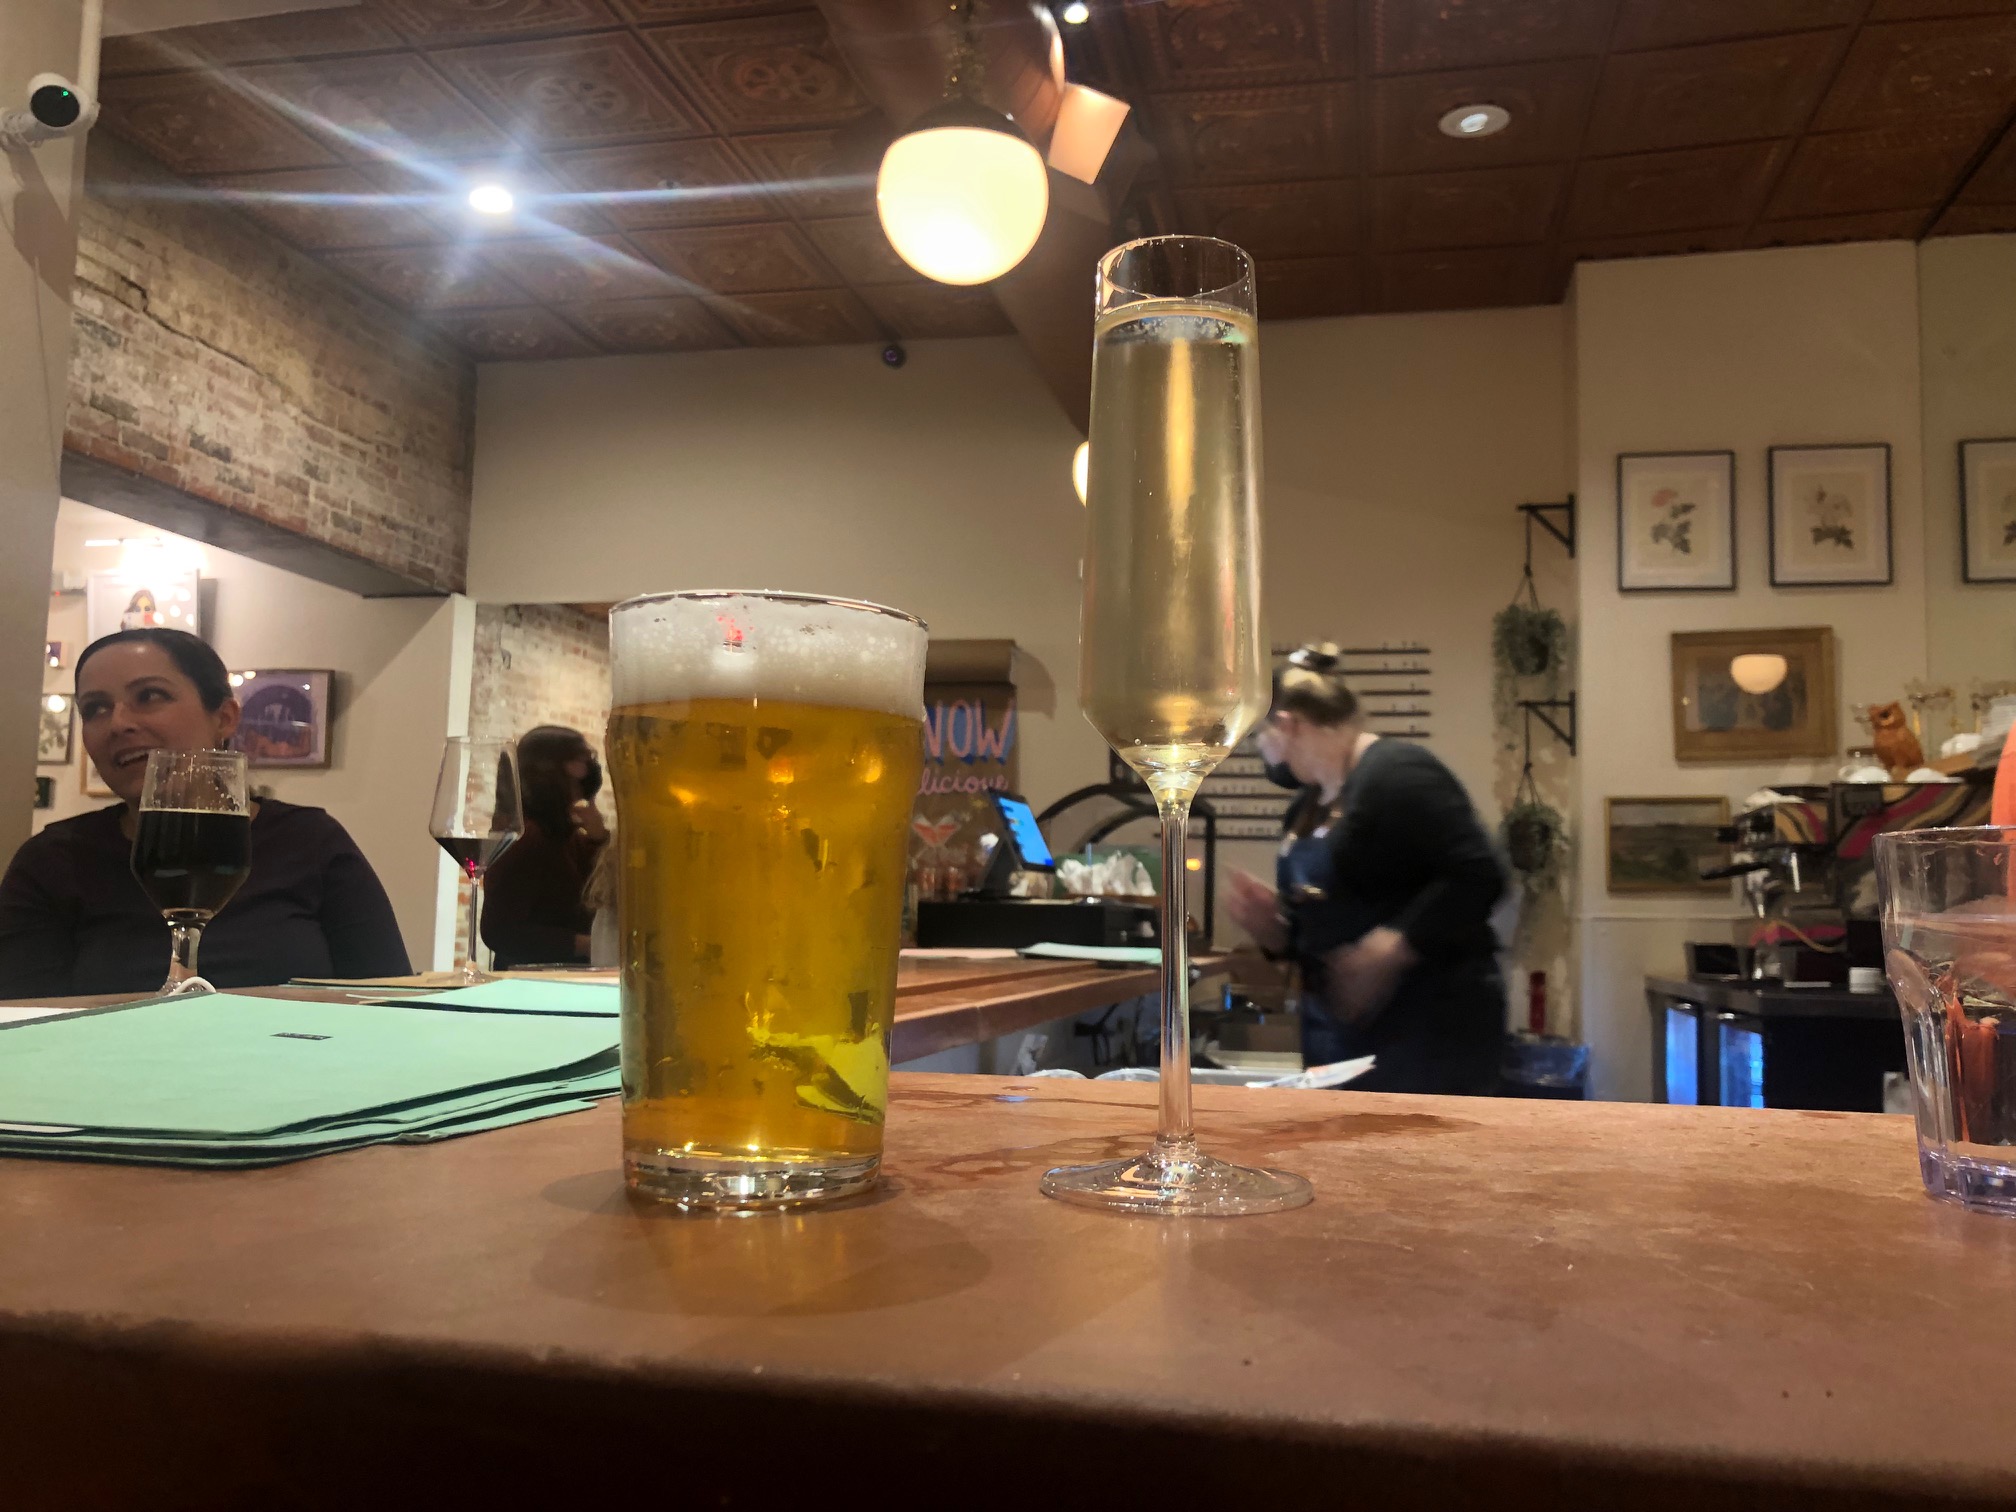 On a brown counter, there are two glasses: a beer glass with a light colored beer and a clear prosecco with tiny bubbles in a champagne flute glass.  Photo by Alyssa Buckley.